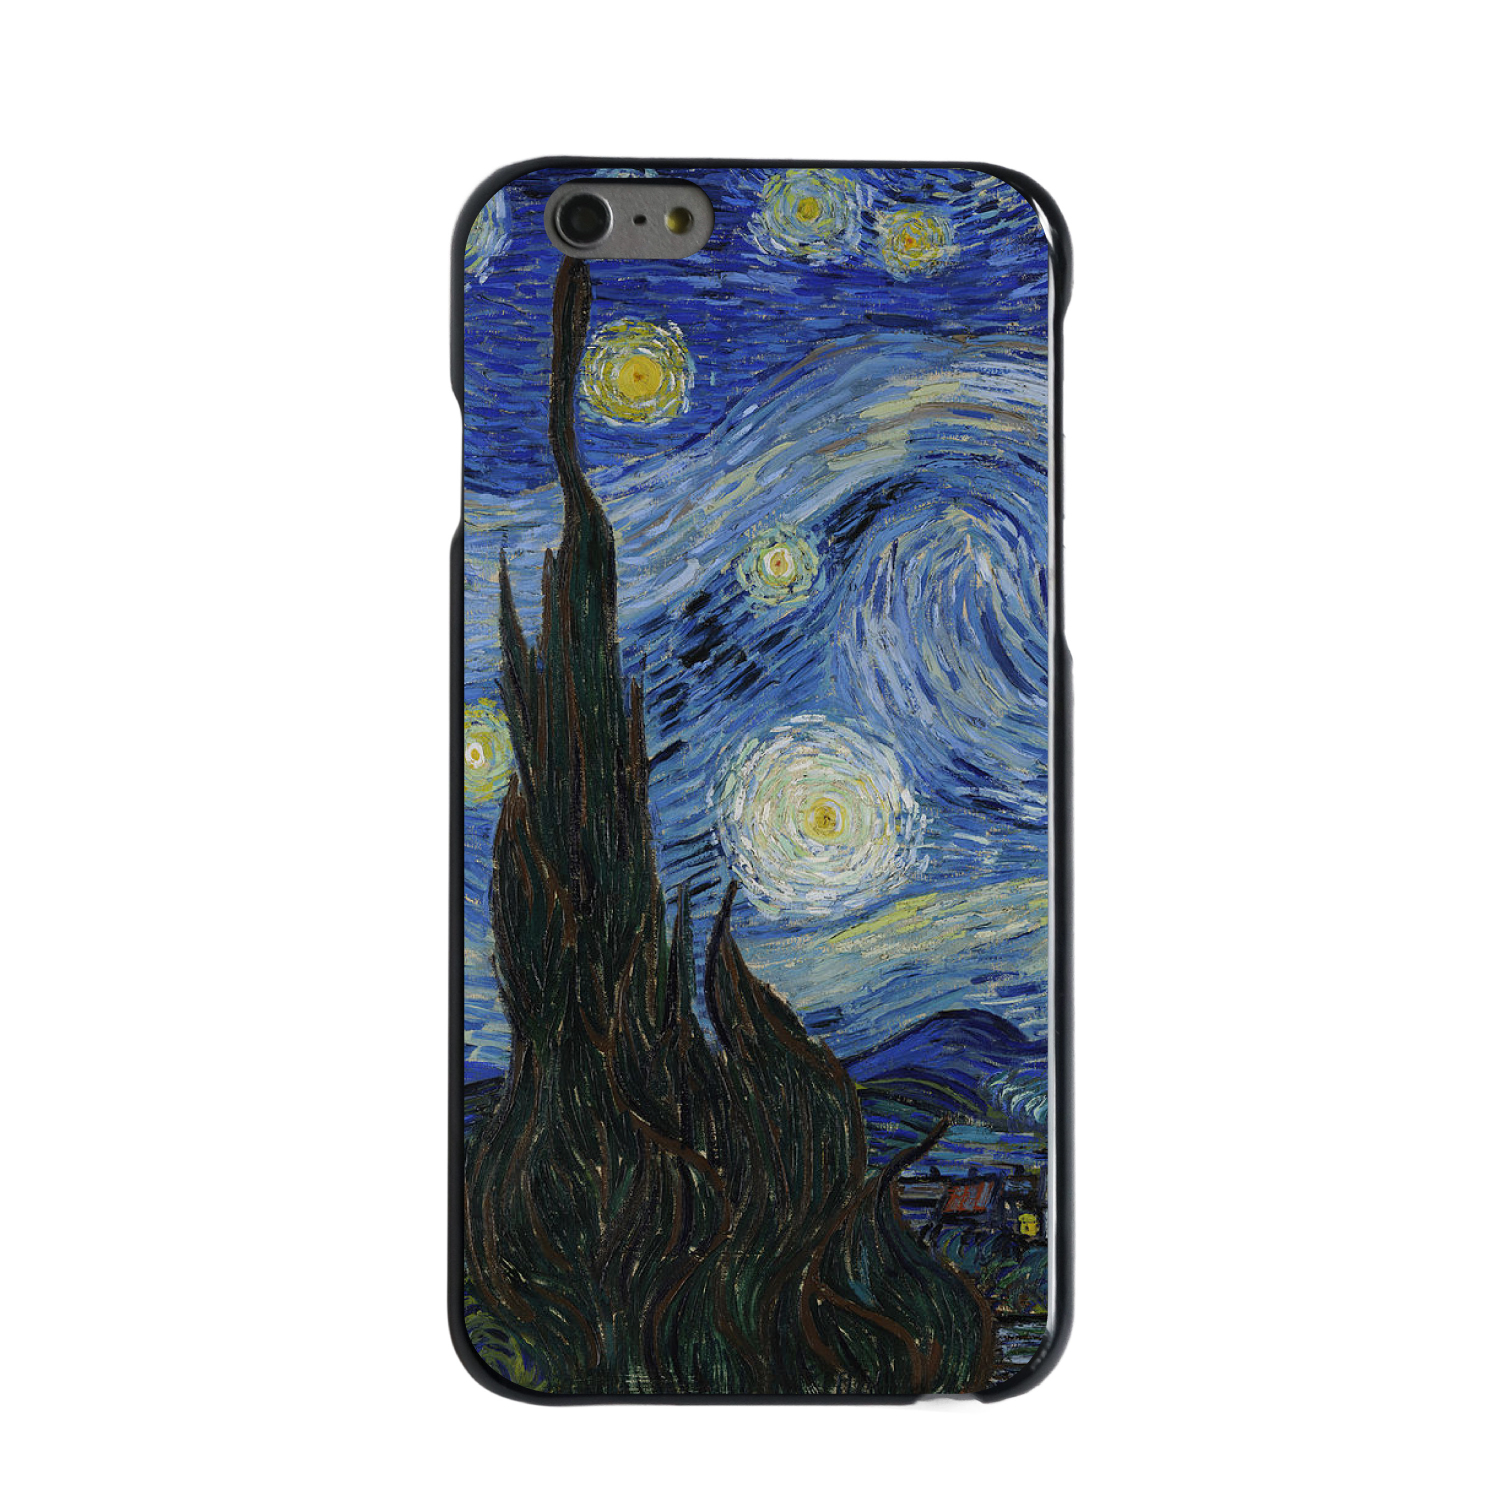 Hard Case Cover for iPhone / Samsung Galaxy Van Gogh Starry Night